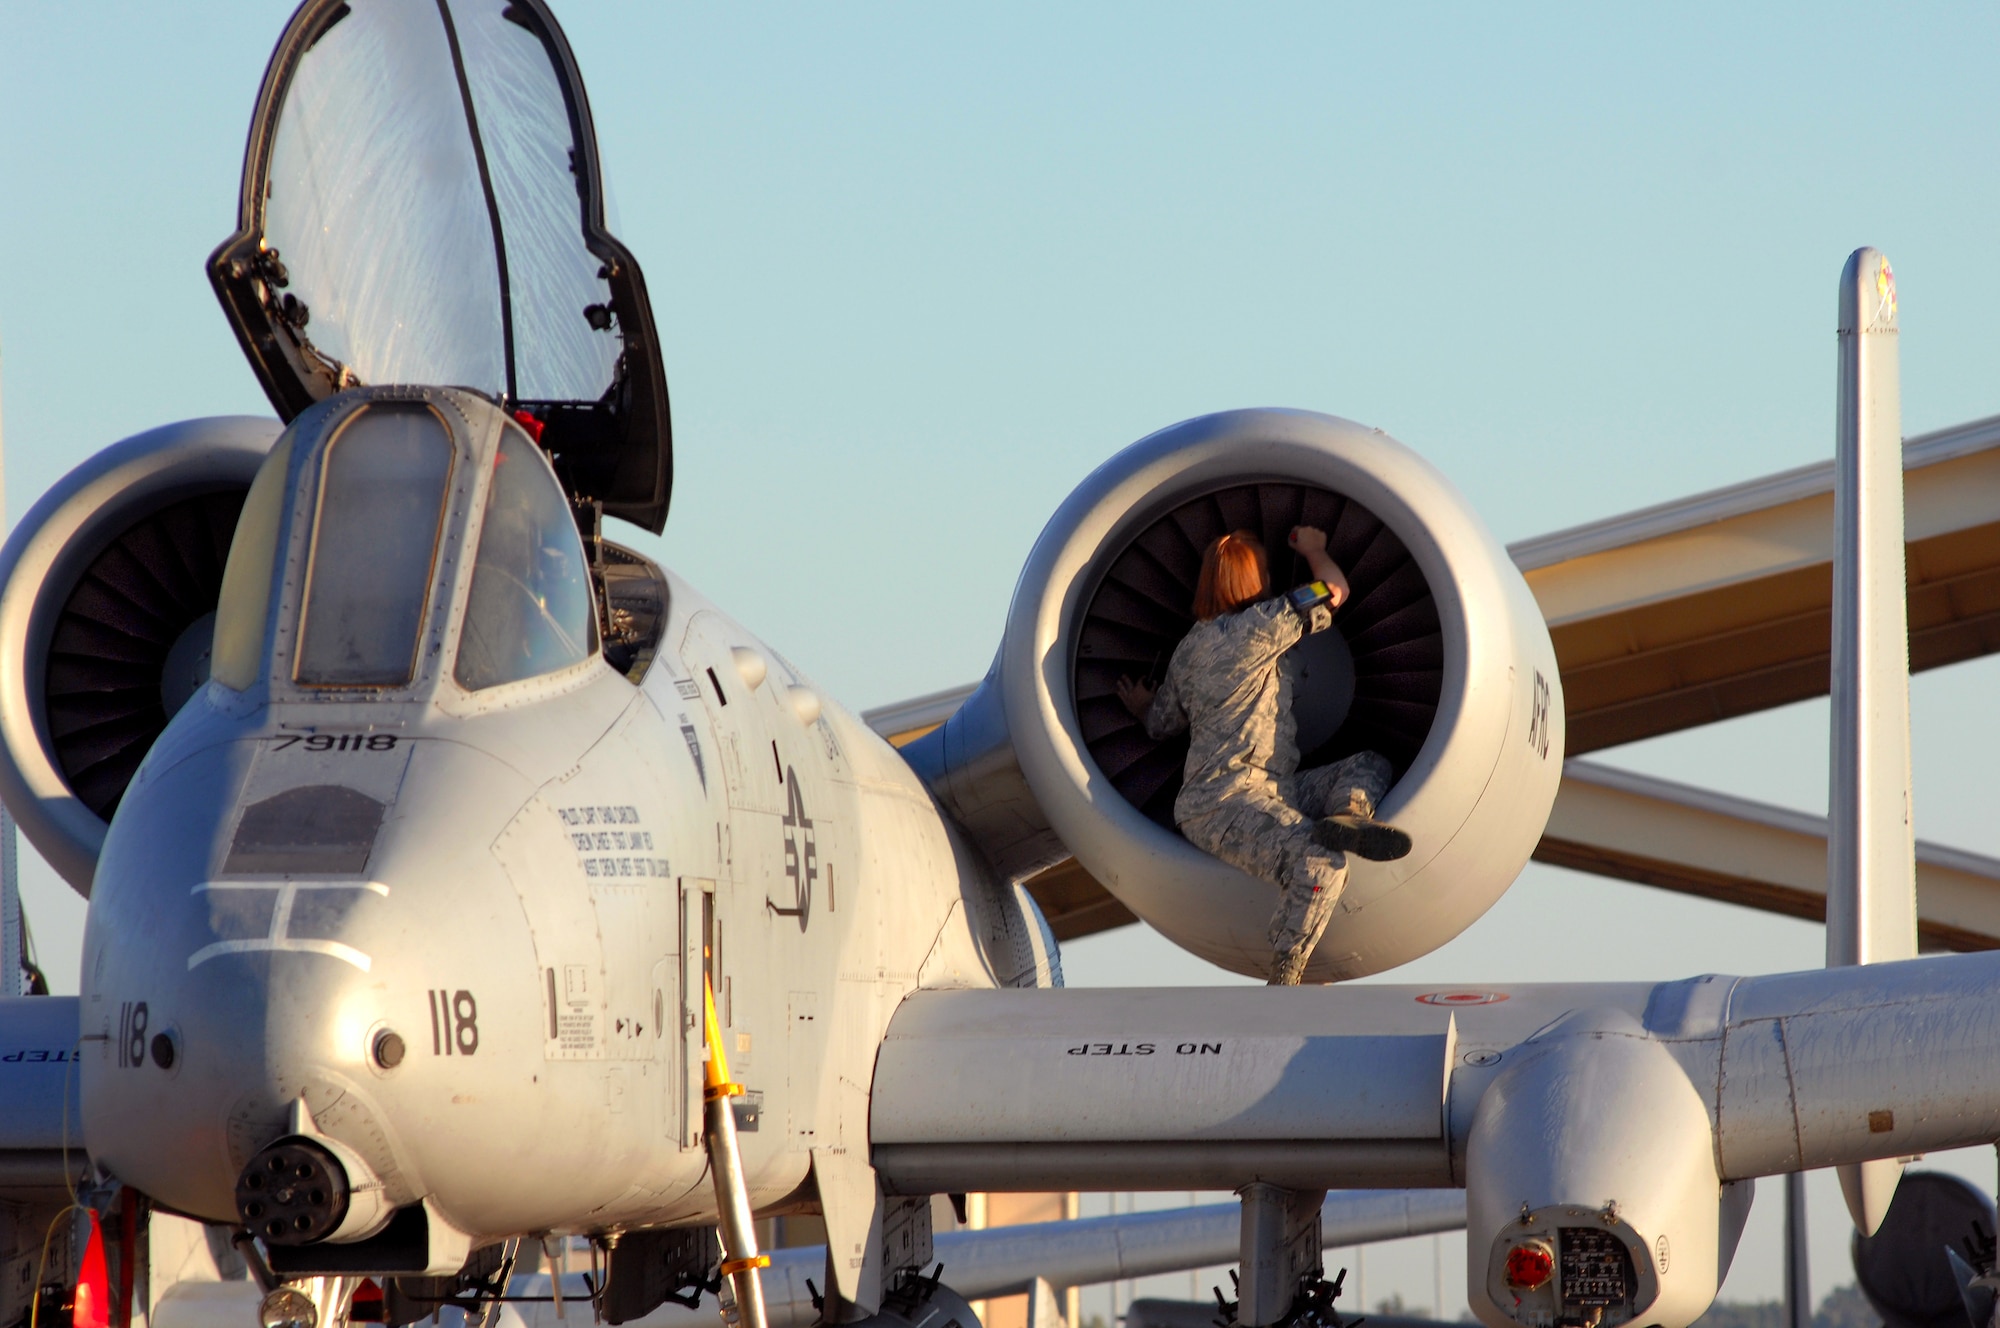 WHITEMAN AIR FORCE BASE, Mo. - Airman Jill Hallandsworth, 442nd Fighter Wing crew chief, performs a pre flight engine check on an A-10 Thunderbolt II during an overall aircraft inspection, Sept. 25. Crew Chiefs with the 442nd FW maintain a vast fleet of 27 A-10 aircraft keeping each jet prepared for any mission at a moment's notice. (U.S. Air Force photo/Senior Airman Kenny Holston)  